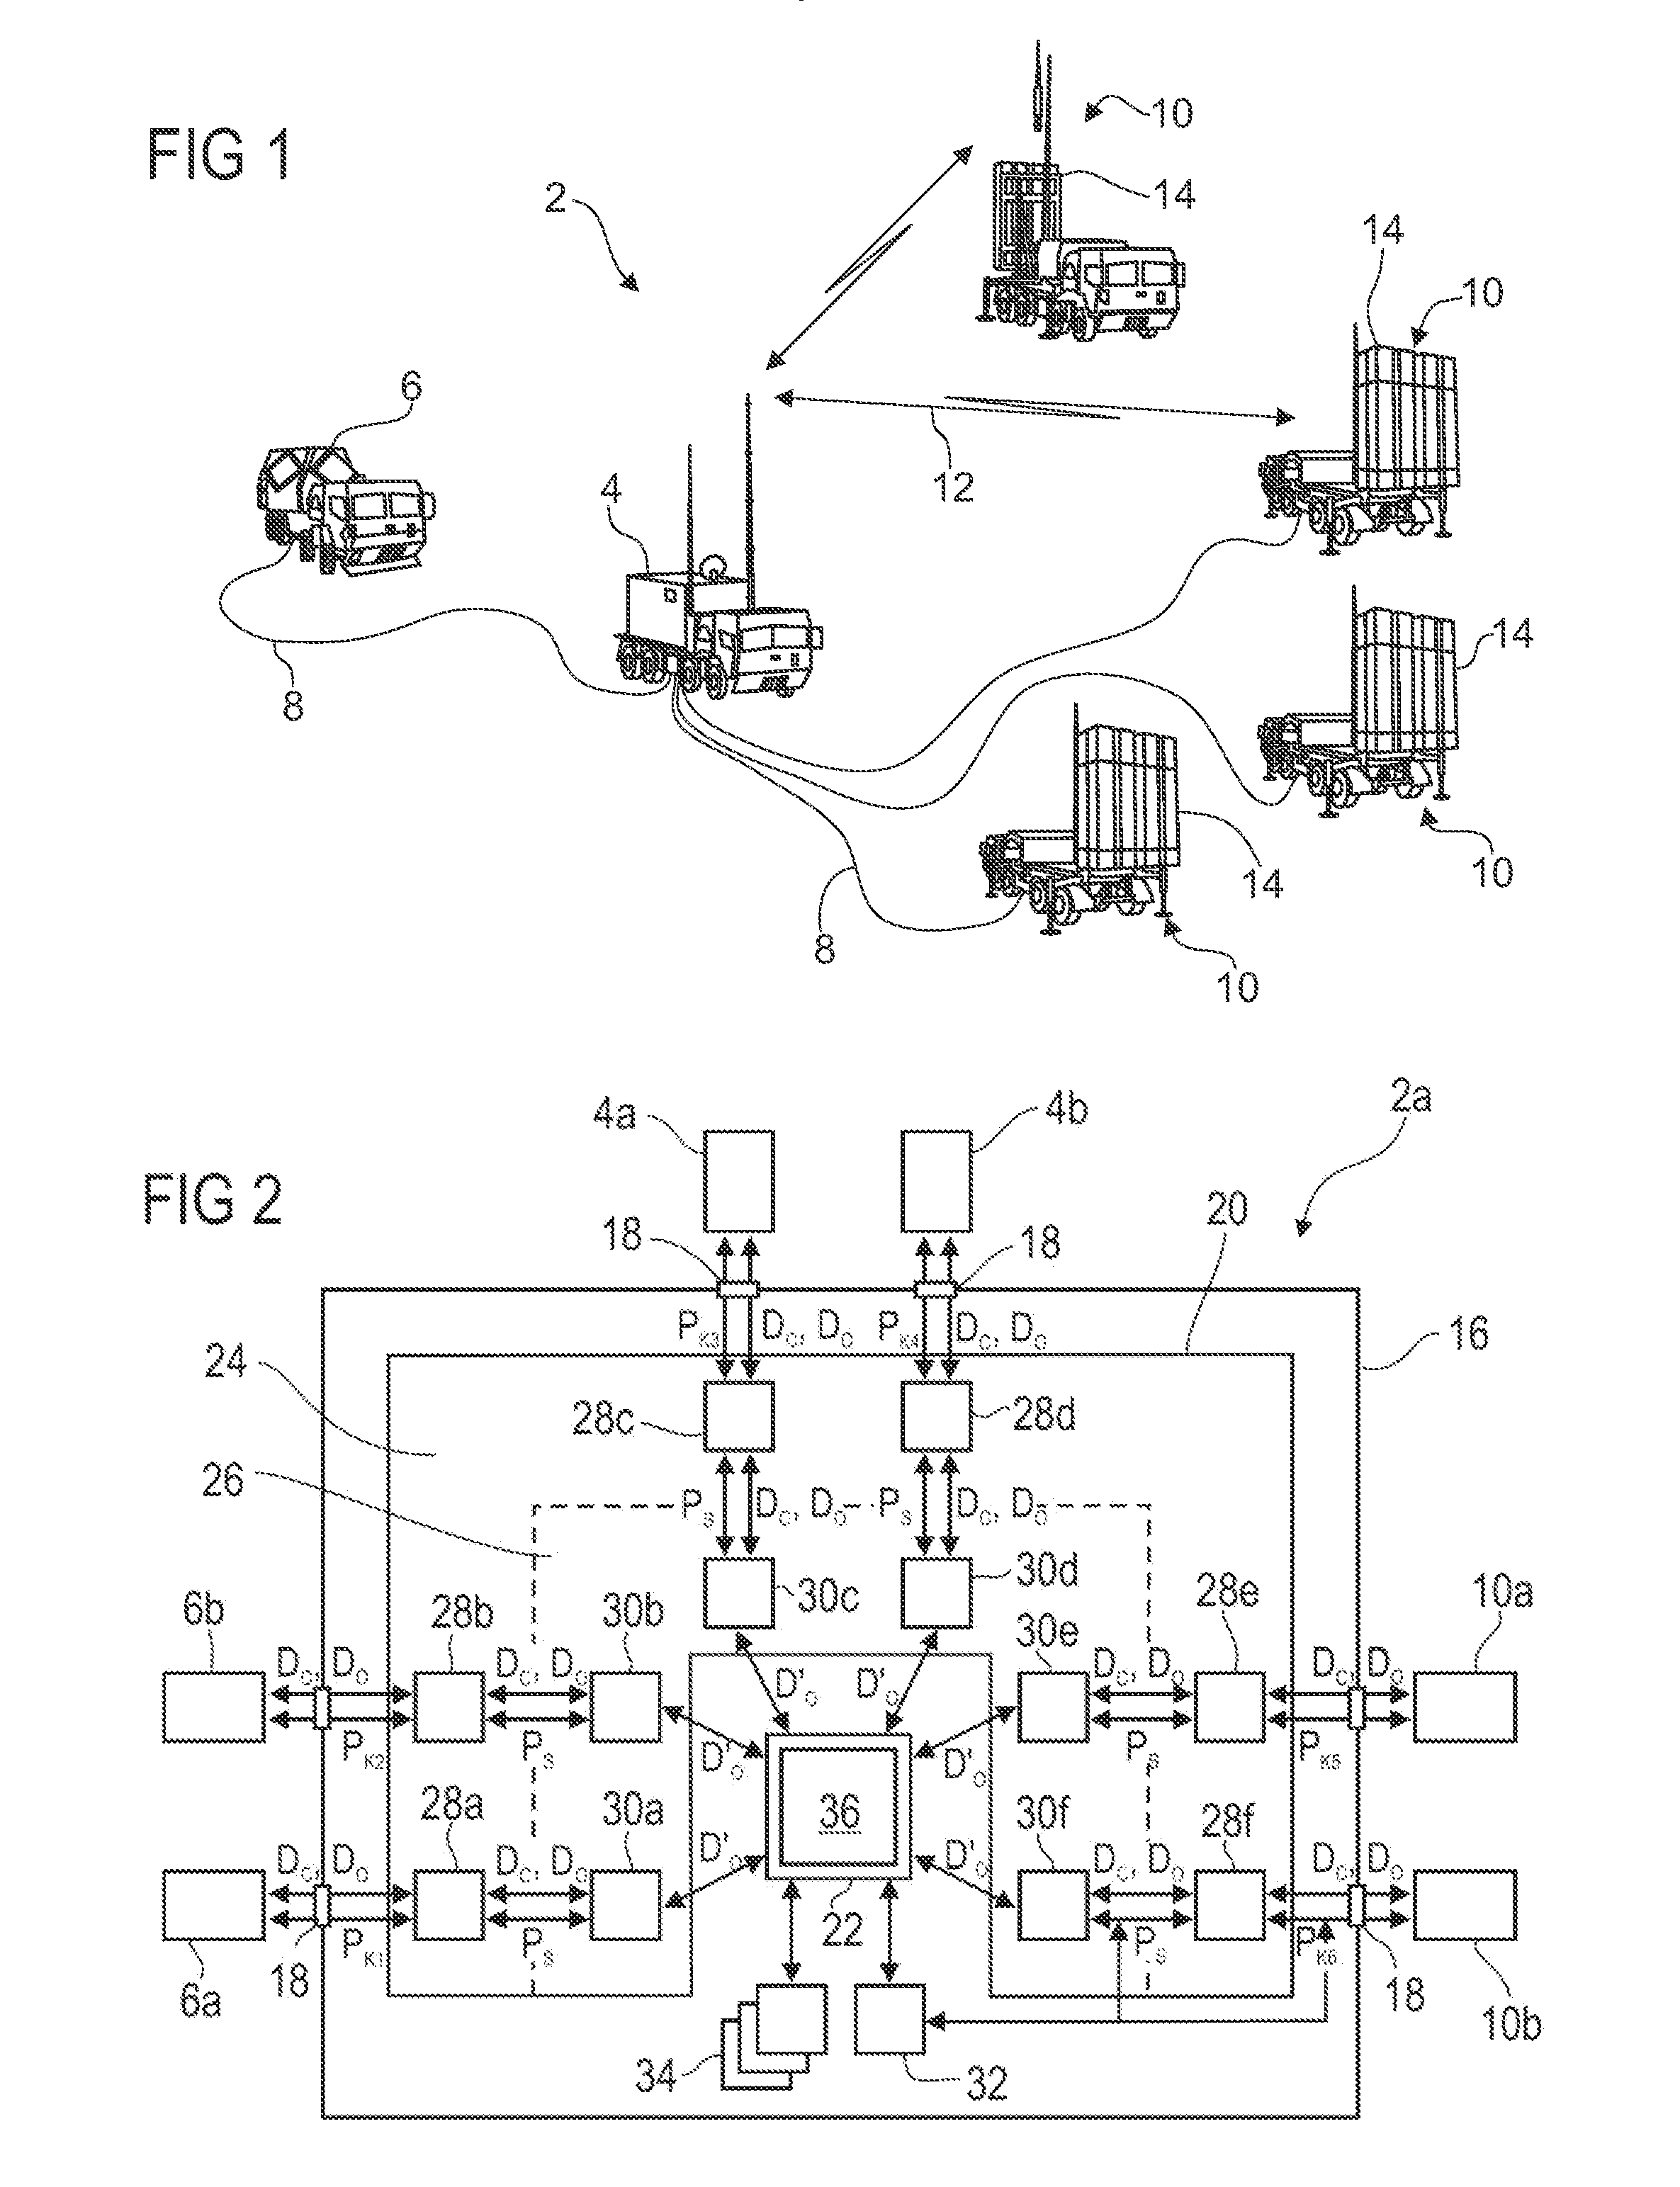 Ground-based Anti-aircraft system and method for operating the system